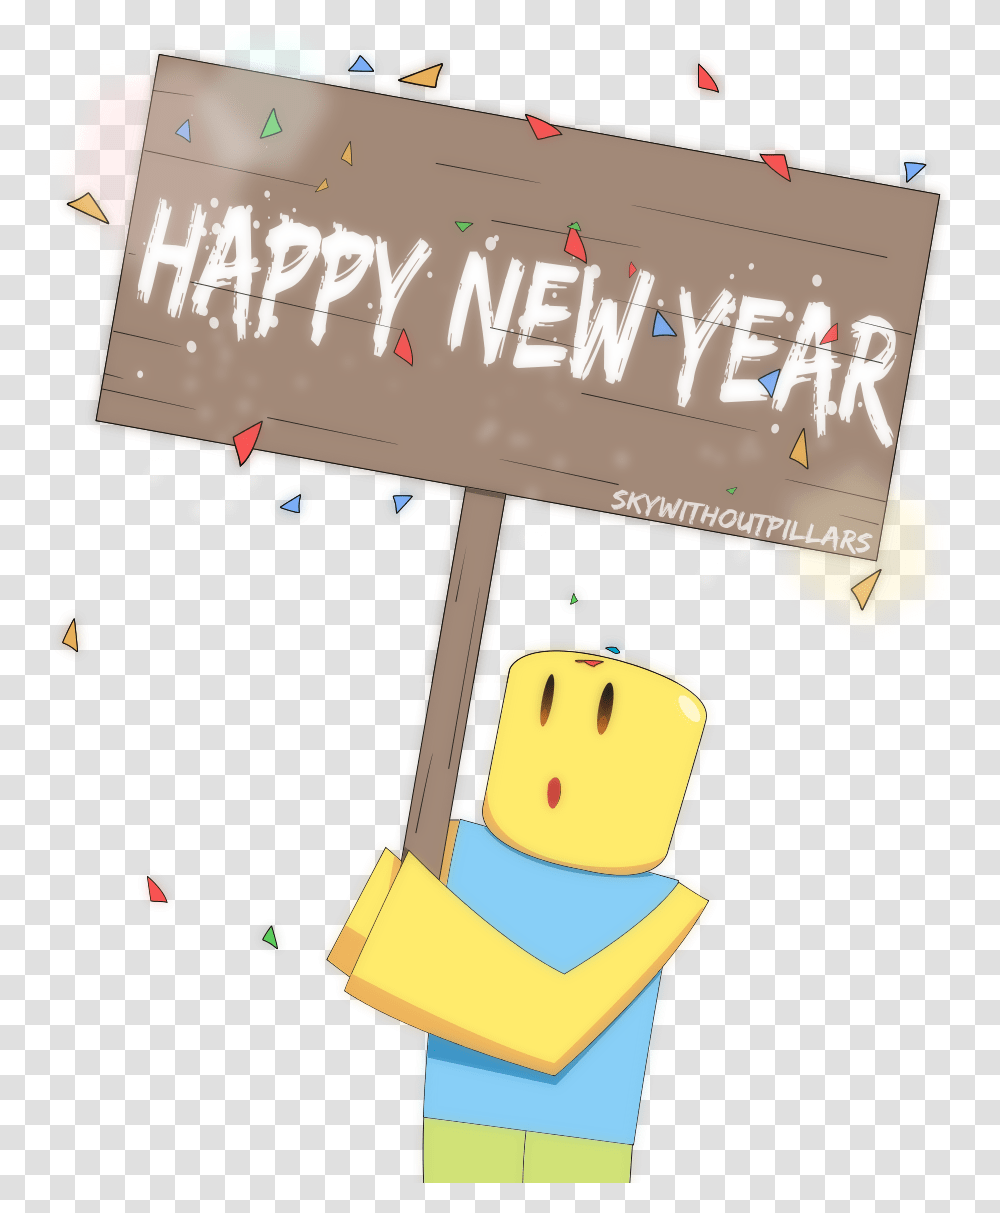 Roblox Avatar 2016 Jerusalem House Happy New Year Roblox, Sign, Advertisement Transparent Png